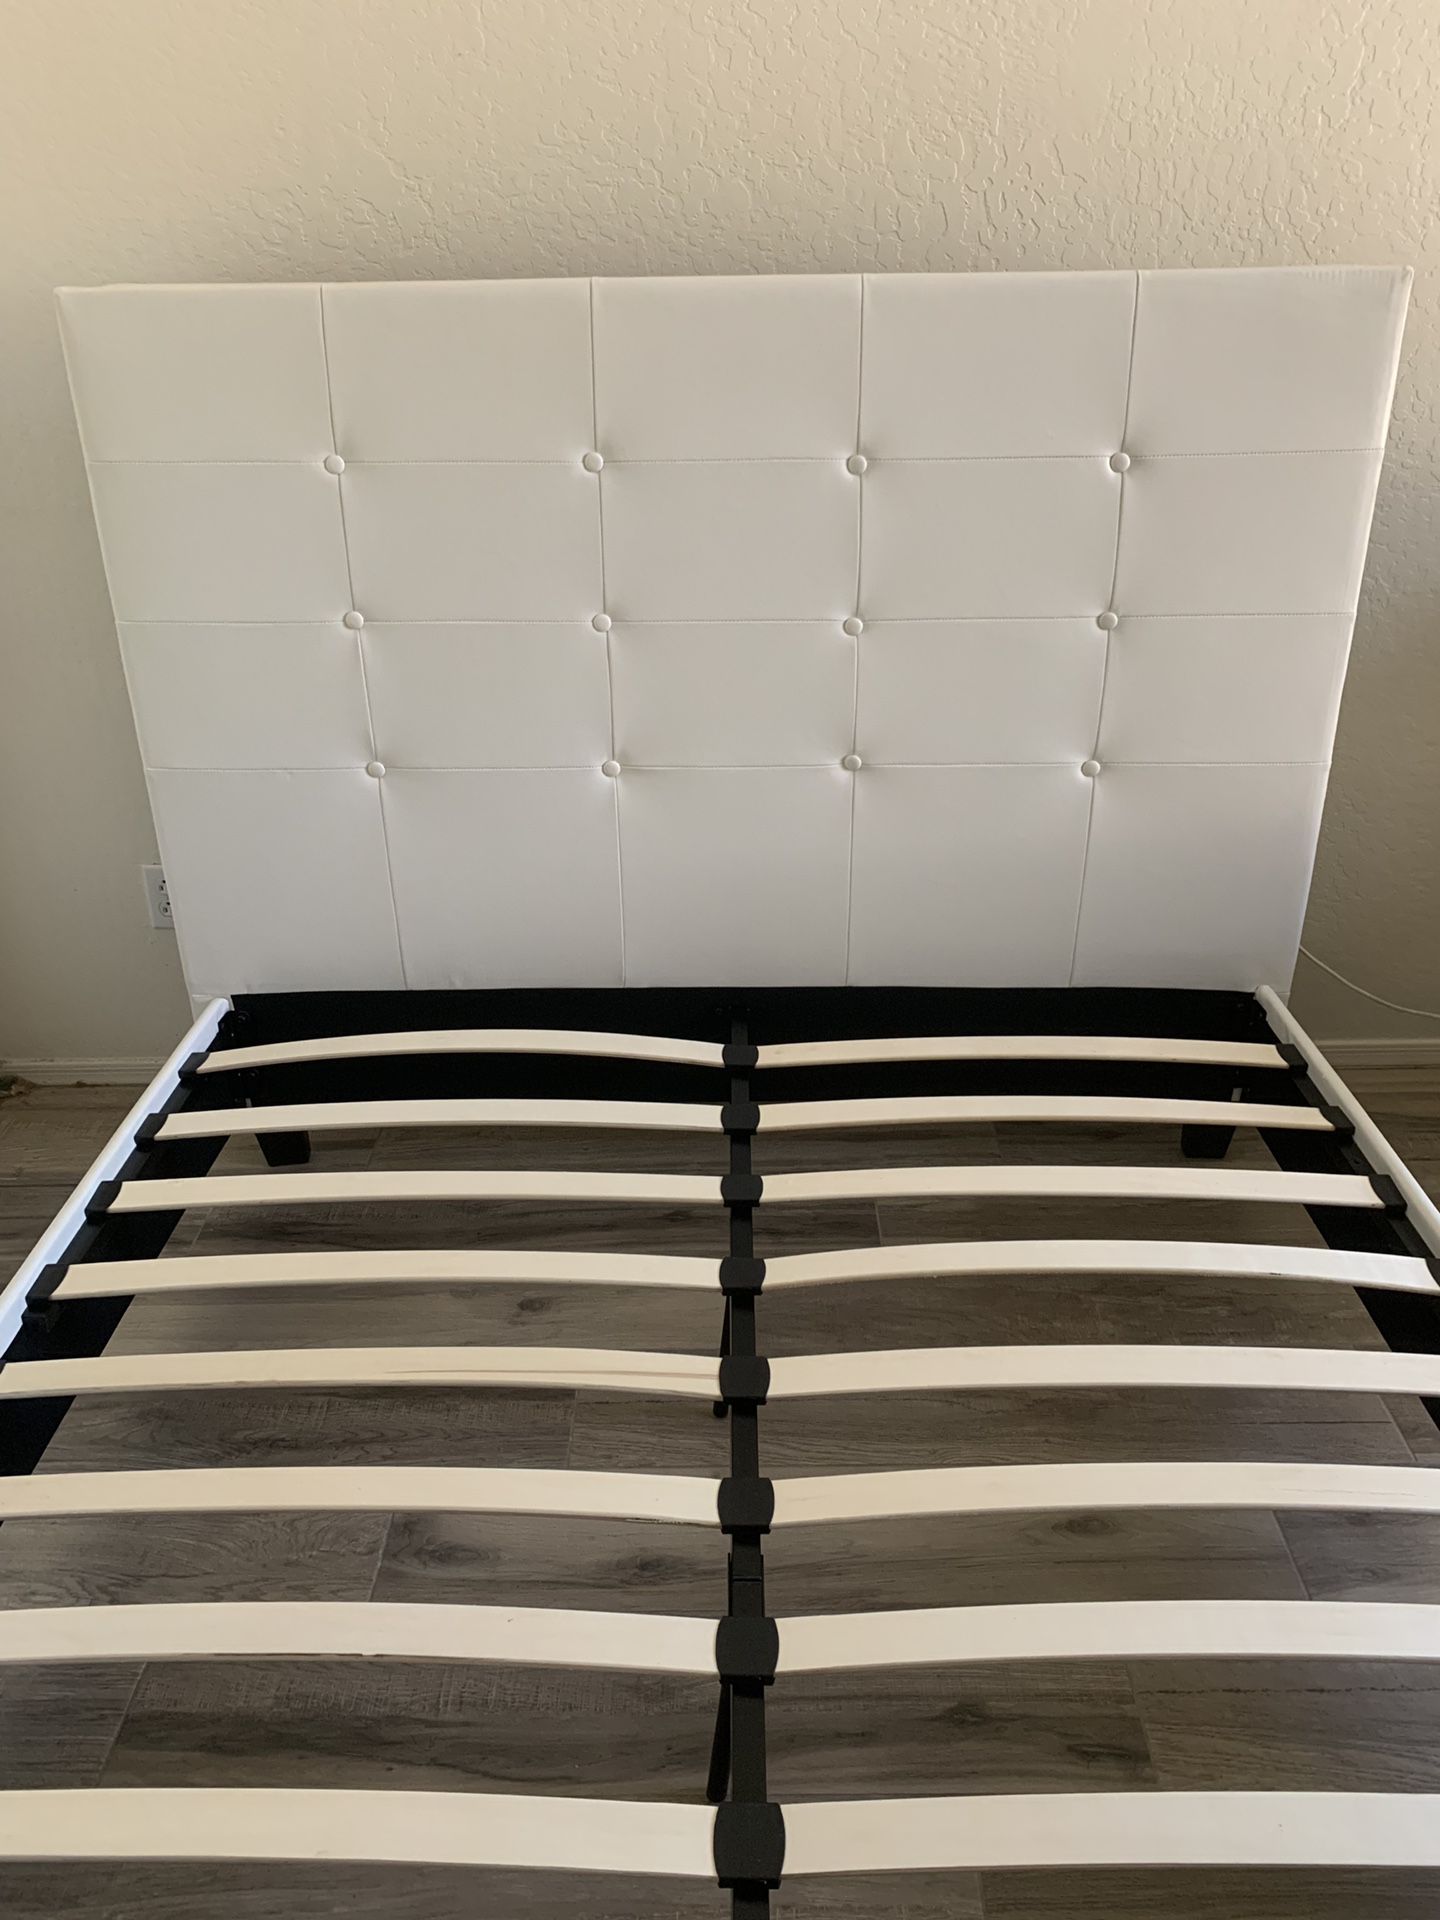 New queen bed frame